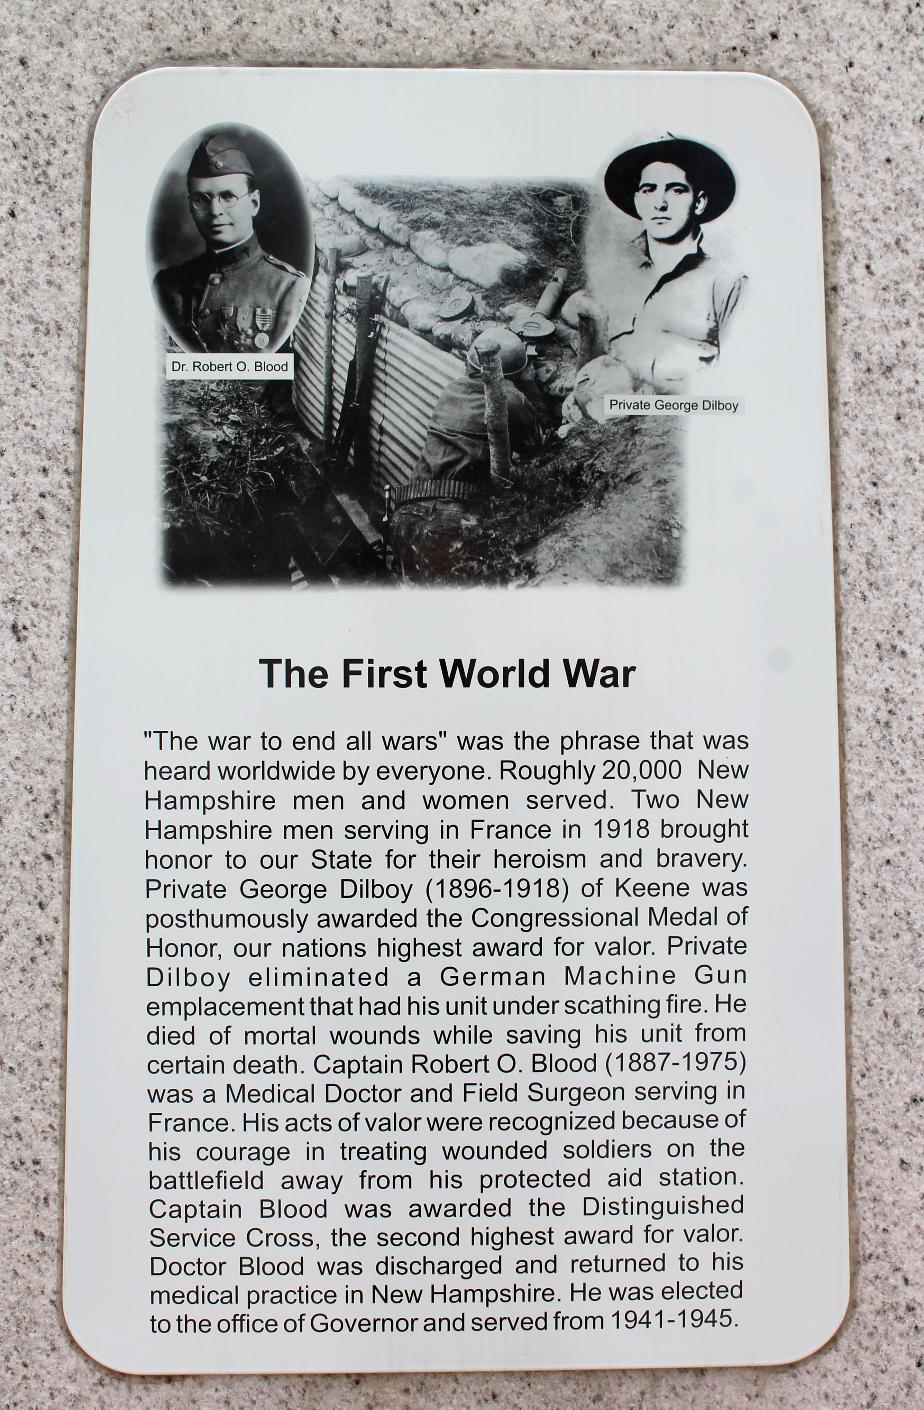 NH State Veterans Cemetery - The First World War